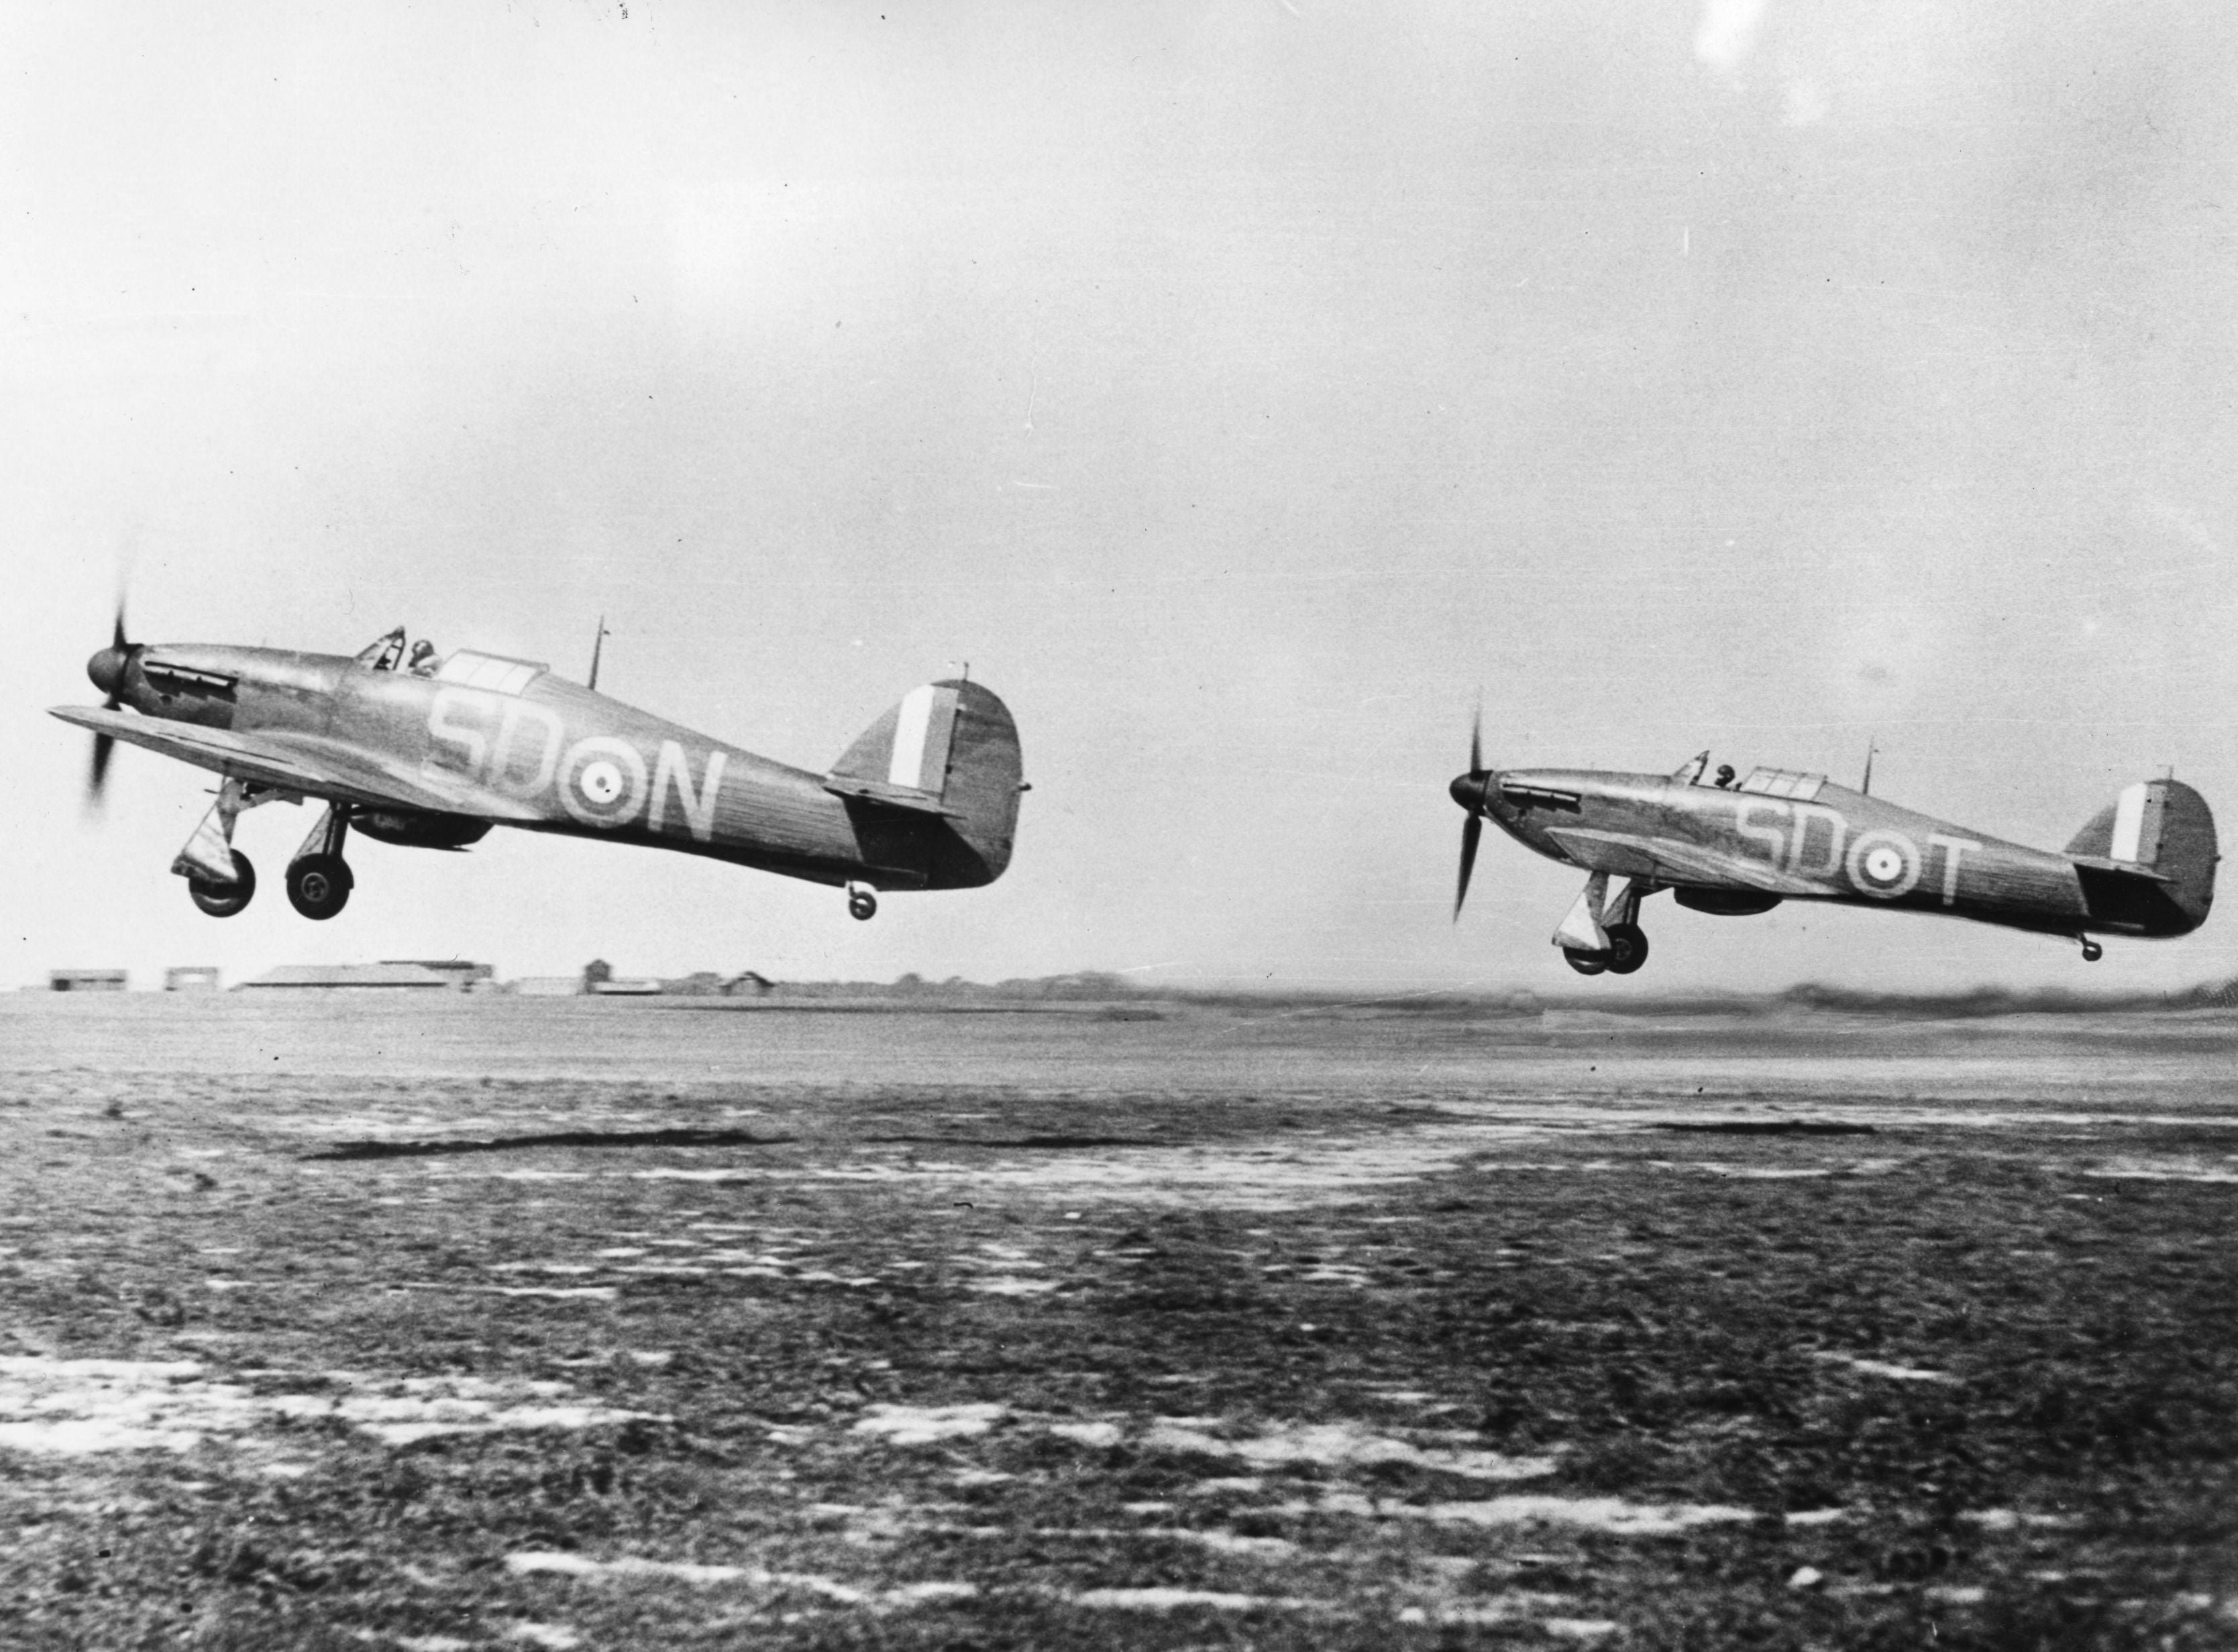 Hurricanes take off for another sortie during the Battle of Britain in September 1940&nbsp;